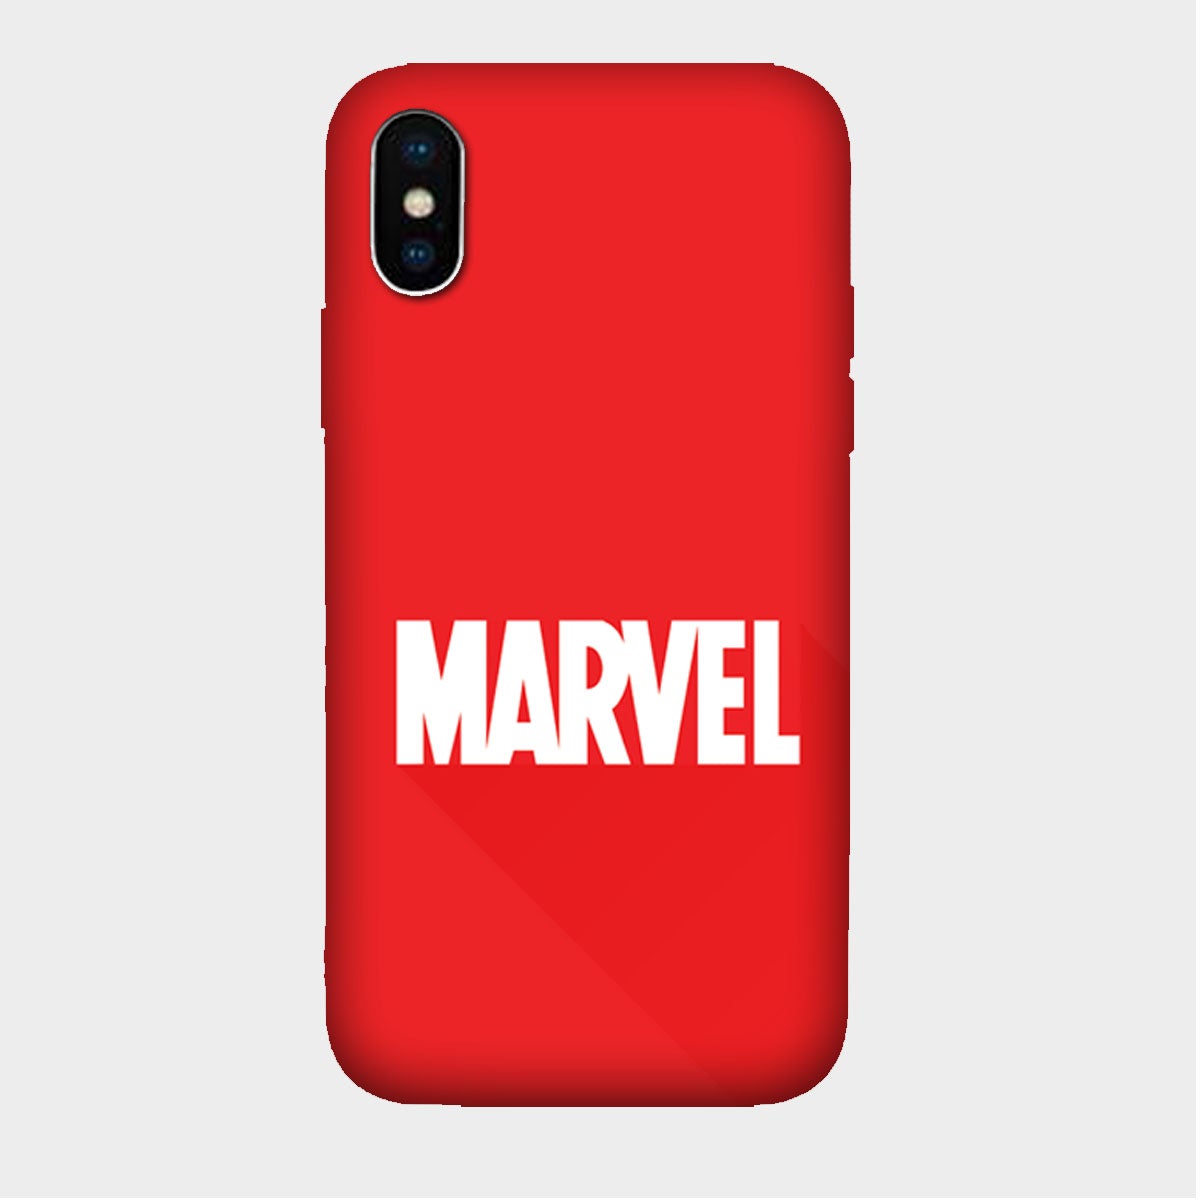 Marvel - Red - Mobile Phone Cover - Hard Case